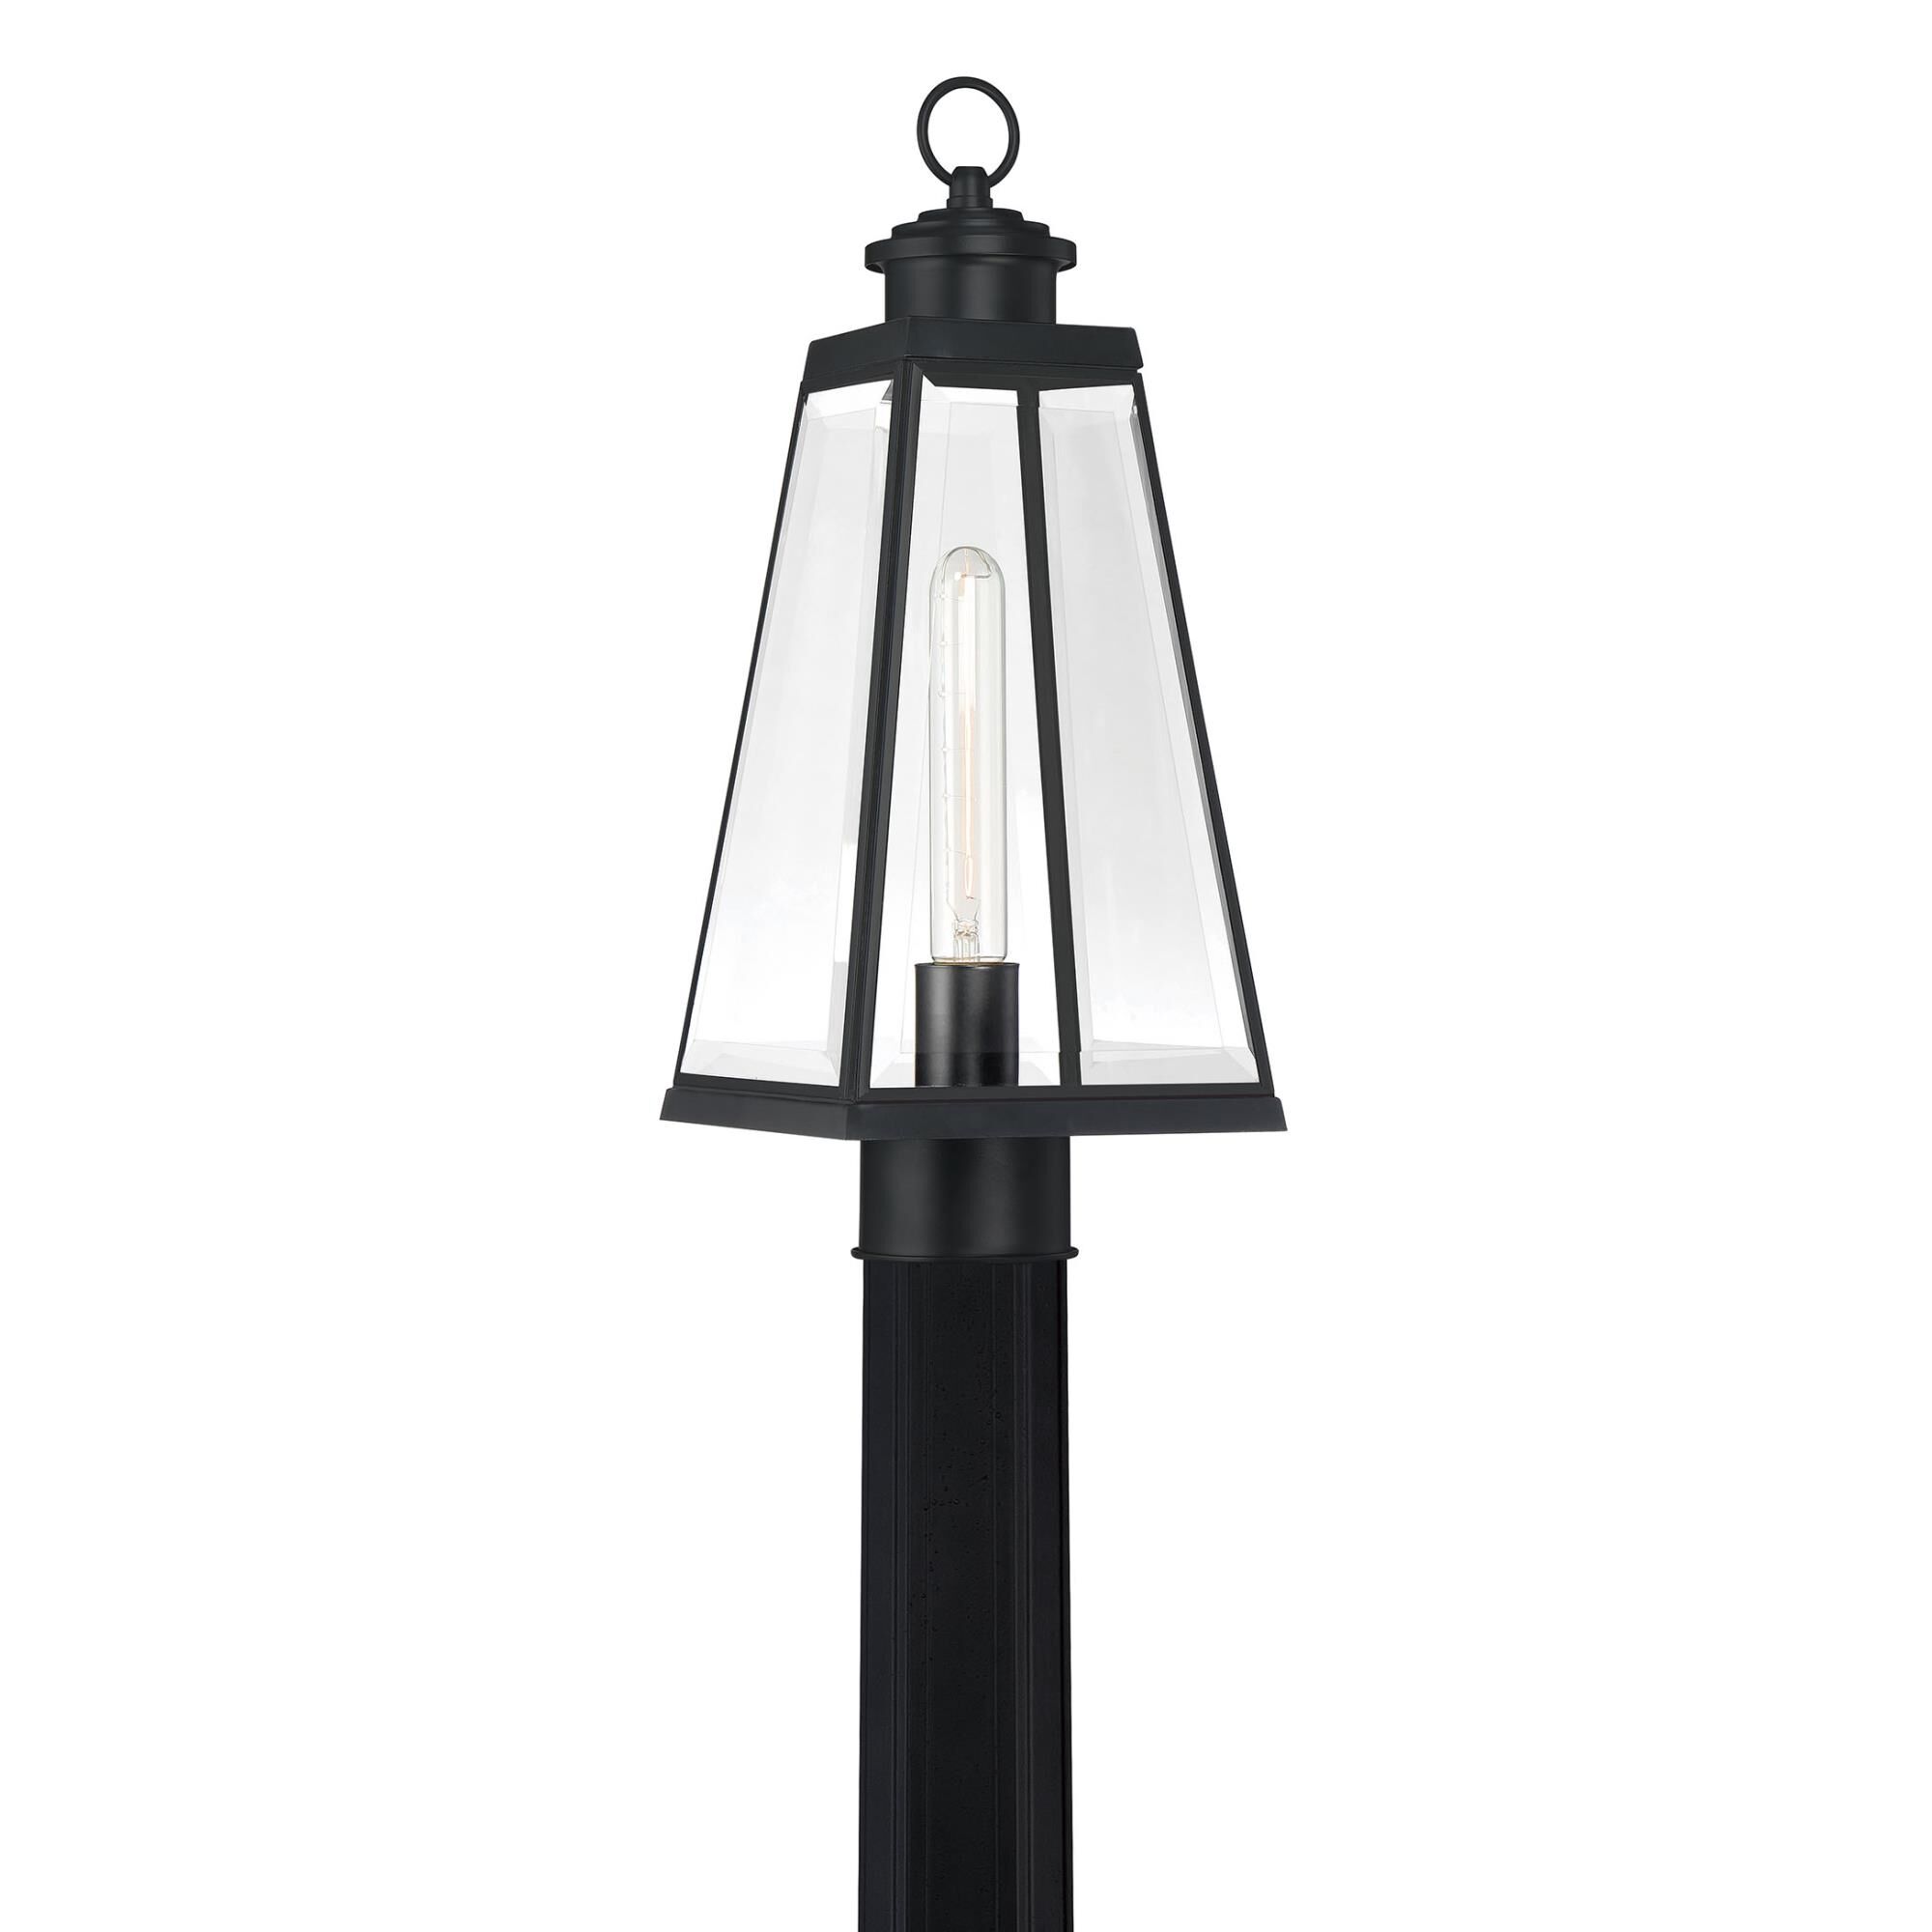 Photos - Floodlight / Garden Lamps Quoizel Paxton 17 Inch Tall Outdoor Post Lamp Paxton - PAX9007MBK - Transi 